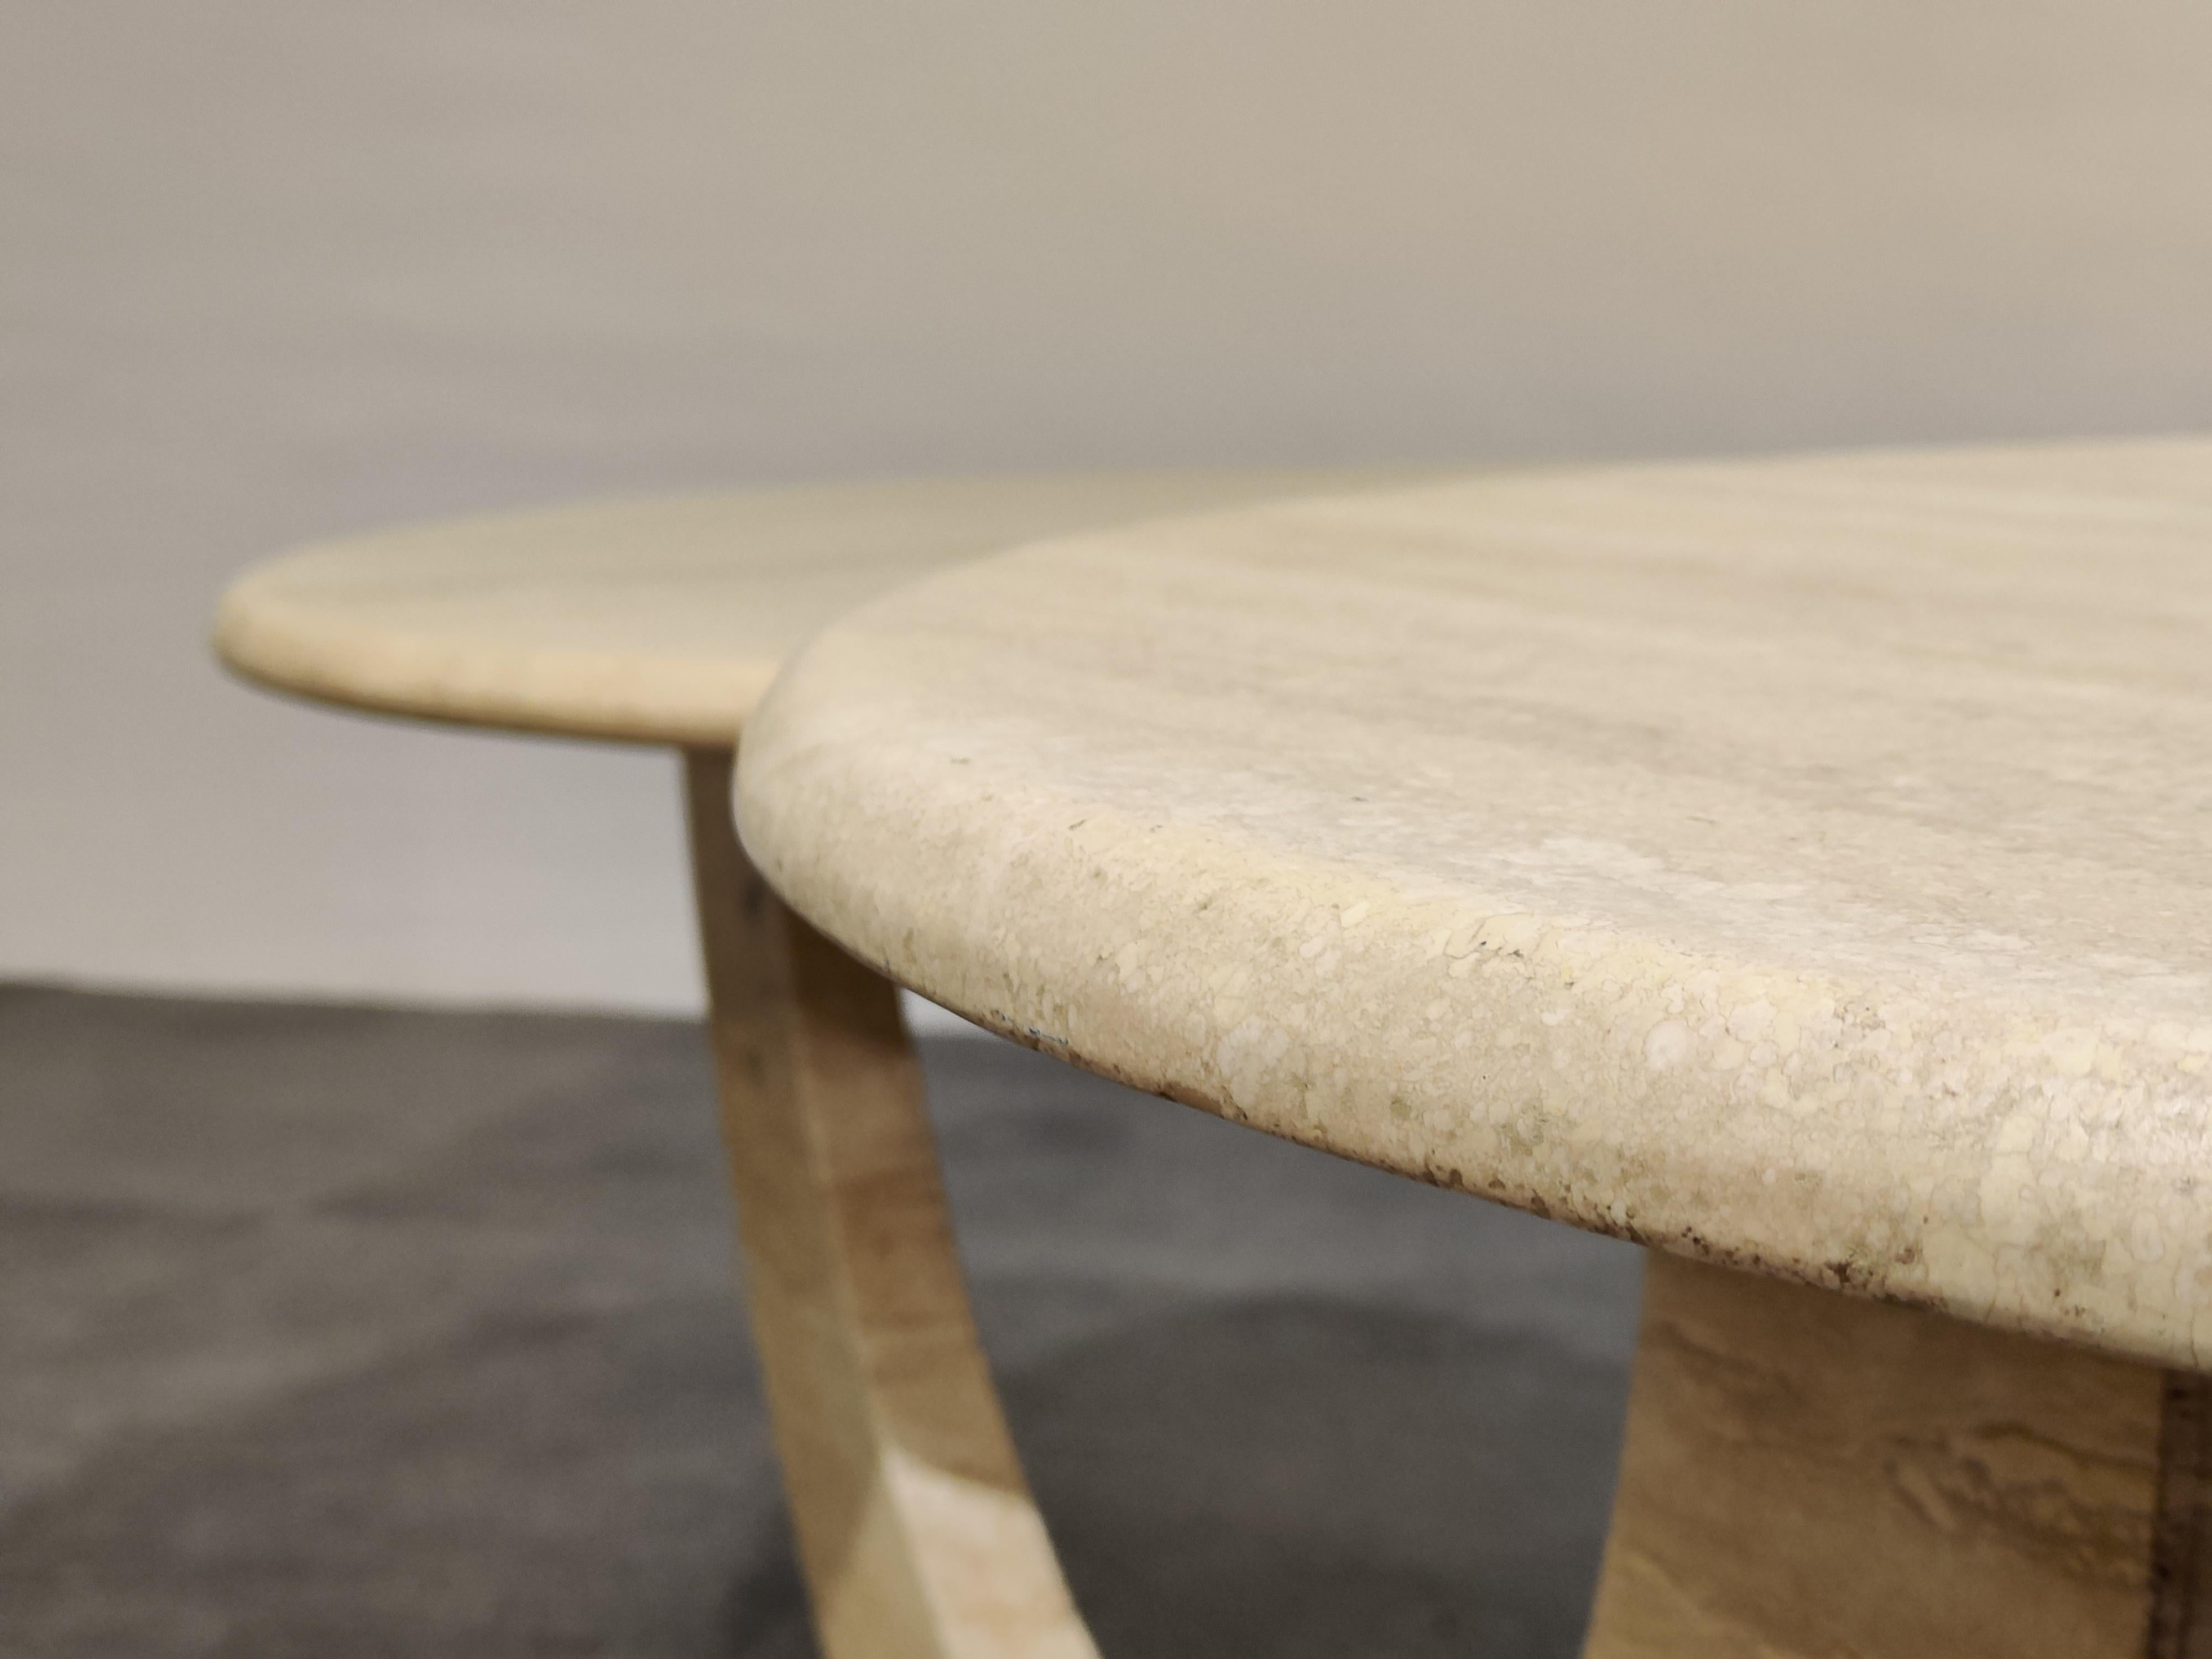 Timeless travertine coffee tables with two round tops.

Beautiful arched base.

Good condition.

1970s, Italy

Dimensions:
Height 42cm/16.53